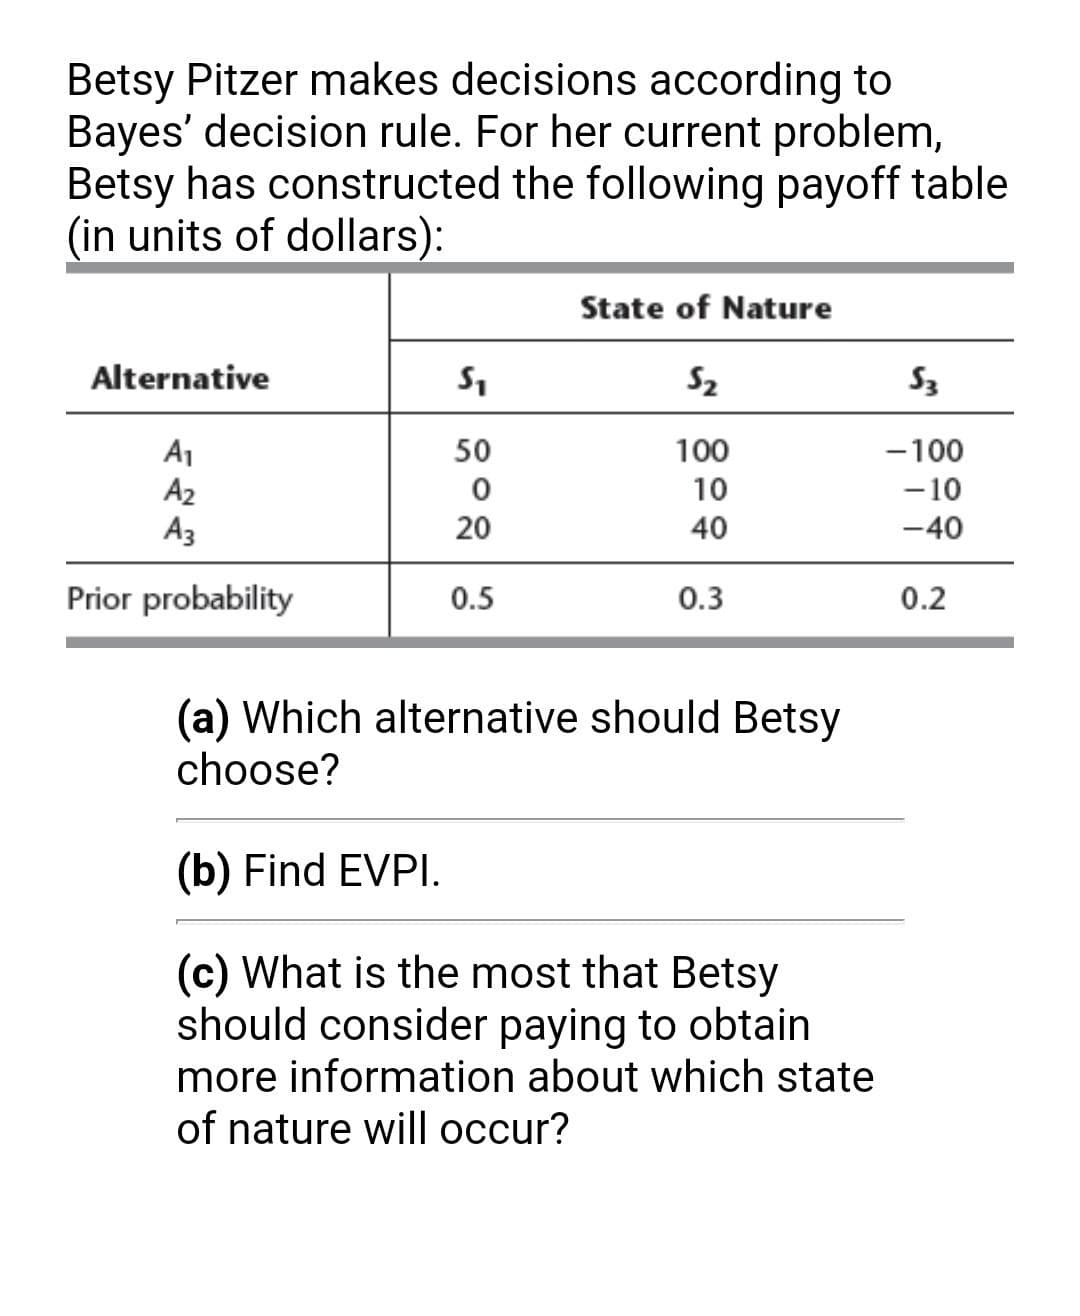 Betsy Pitzer makes decisions according to
Bayes' decision rule. For her current problem,
Betsy has constructed the following payoff table
(in units of dollars):
Alternative
A₁
A₂
A3
Prior probability
S₁
50
0
20
0.5
State of Nature
$₂
100
10
40
0.3
(a) Which alternative should Betsy
choose?
(b) Find EVPI.
(c) What is the most that Betsy
should consider paying to obtain
more information about which state
of nature will occur?
$3
-100
-10
-40
0.2